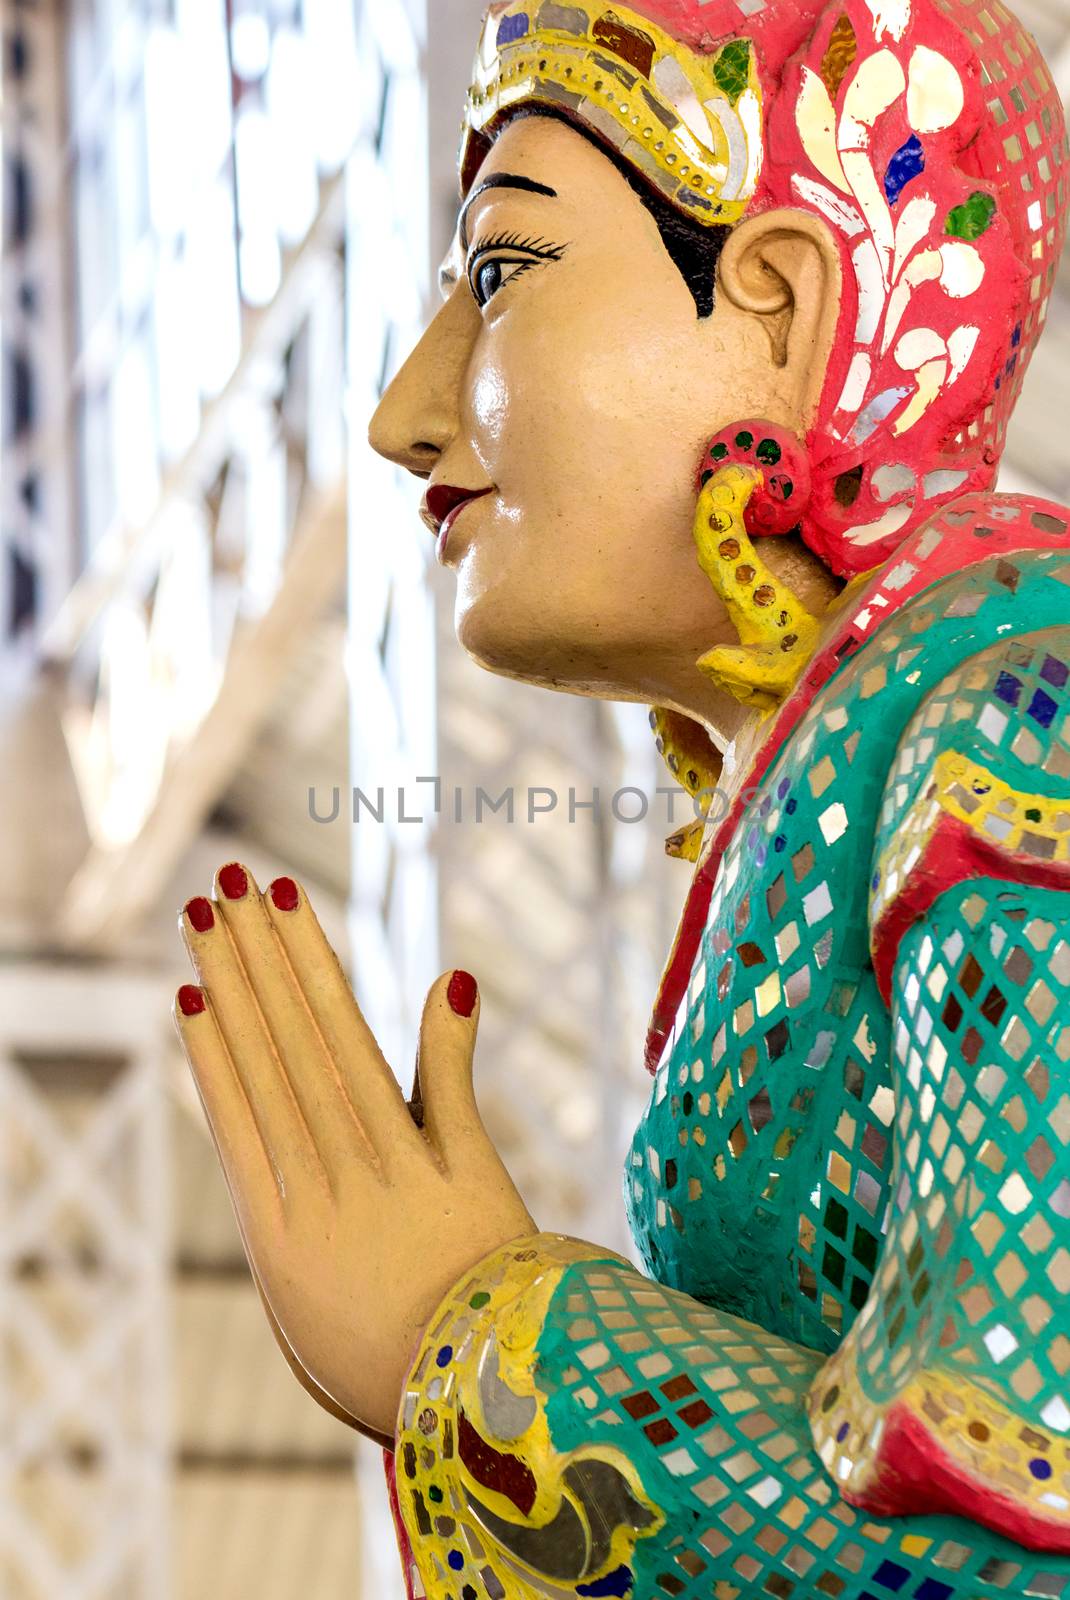 The Statue of praying  in Ngahtatkyi Pagoda Temple in Yangon, Myanmar (Burma) They are public domain or treasure of Buddhism.